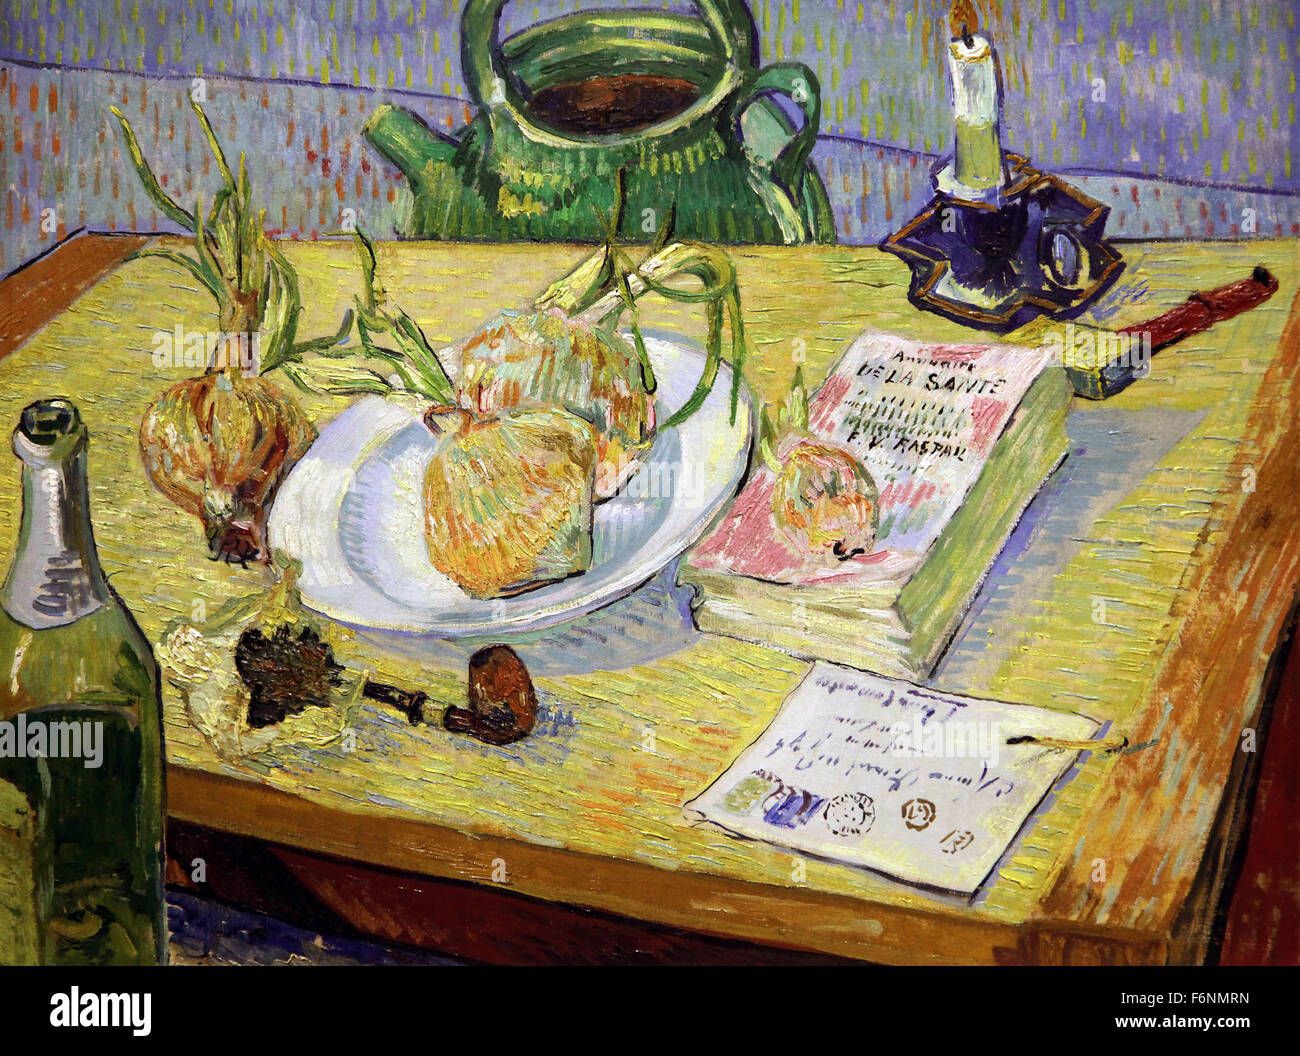 Still life with plate of onions 1889 by Vincent van Gogh Stock Photo